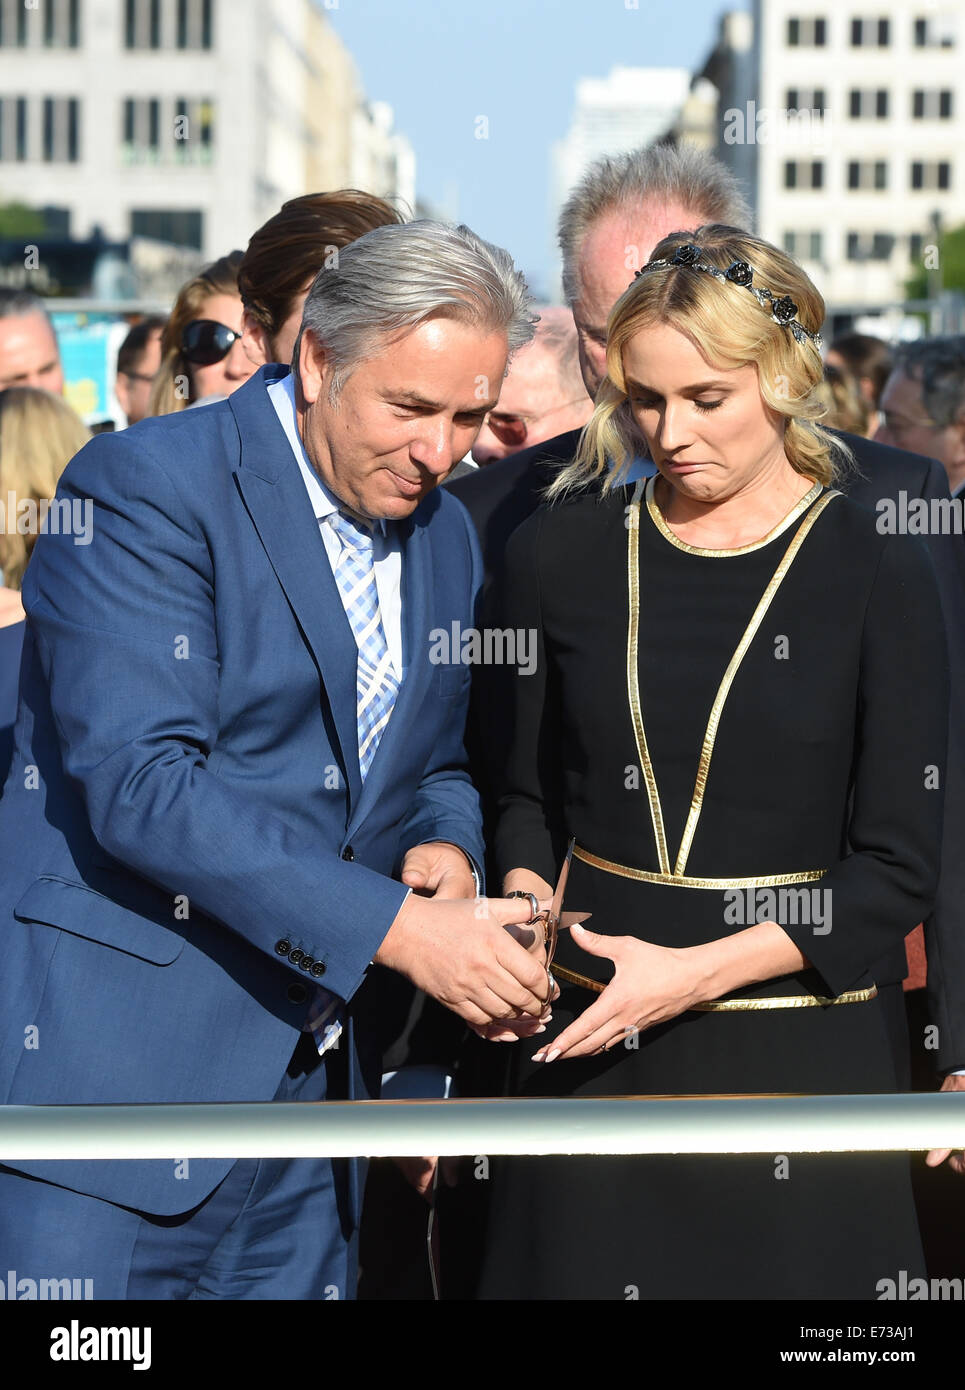 The Governing Mayor of Berlin Klaus Wowereit and actress Diane Kruger cut the golden ribbon at the re-opening ceremony of 'Boulevard of the Stars' at Potsdamer Platz, Berlin, Germany, 4 September 2014. There are 101 stars on the boulevard representing German film and TV celebrities. Photo: Jens Kalaene/dpa Stock Photo